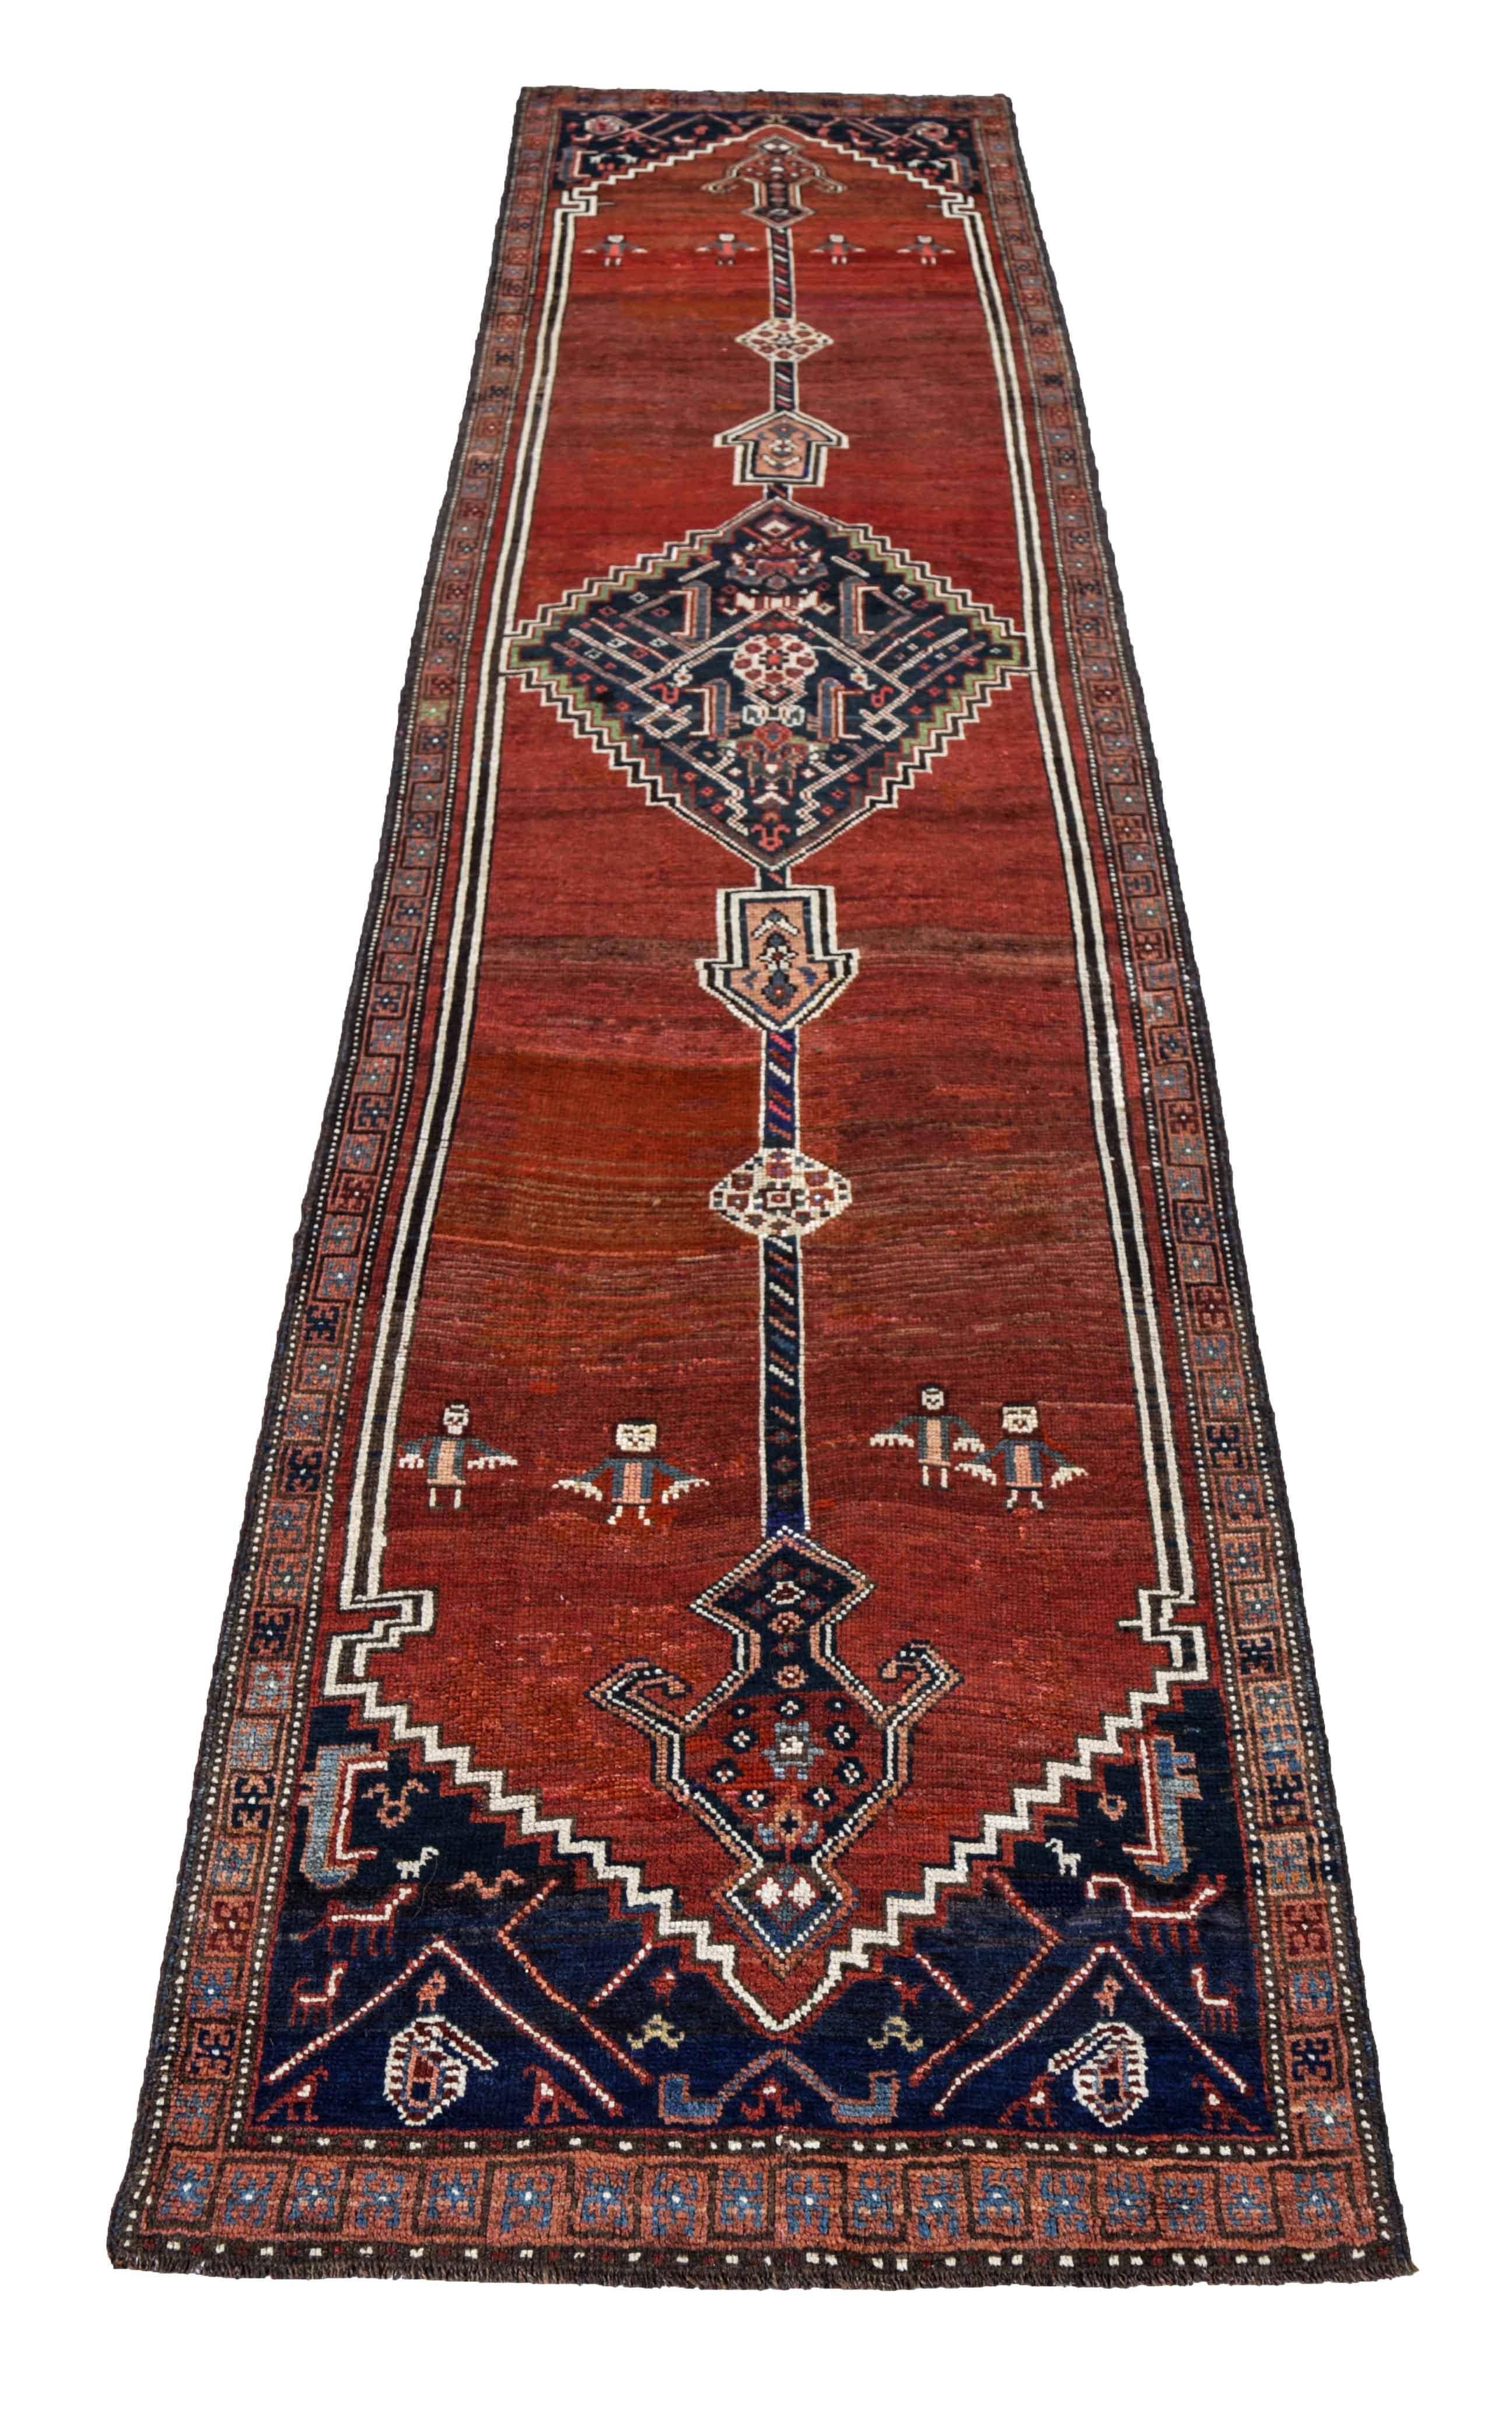 Antique Persian runner rug handwoven from the finest sheep’s wool. It’s colored with all-natural vegetable dyes that are safe for humans and pets. It’s a traditional Bijar design handwoven by expert artisans. It’s a lovely runner rug that can be